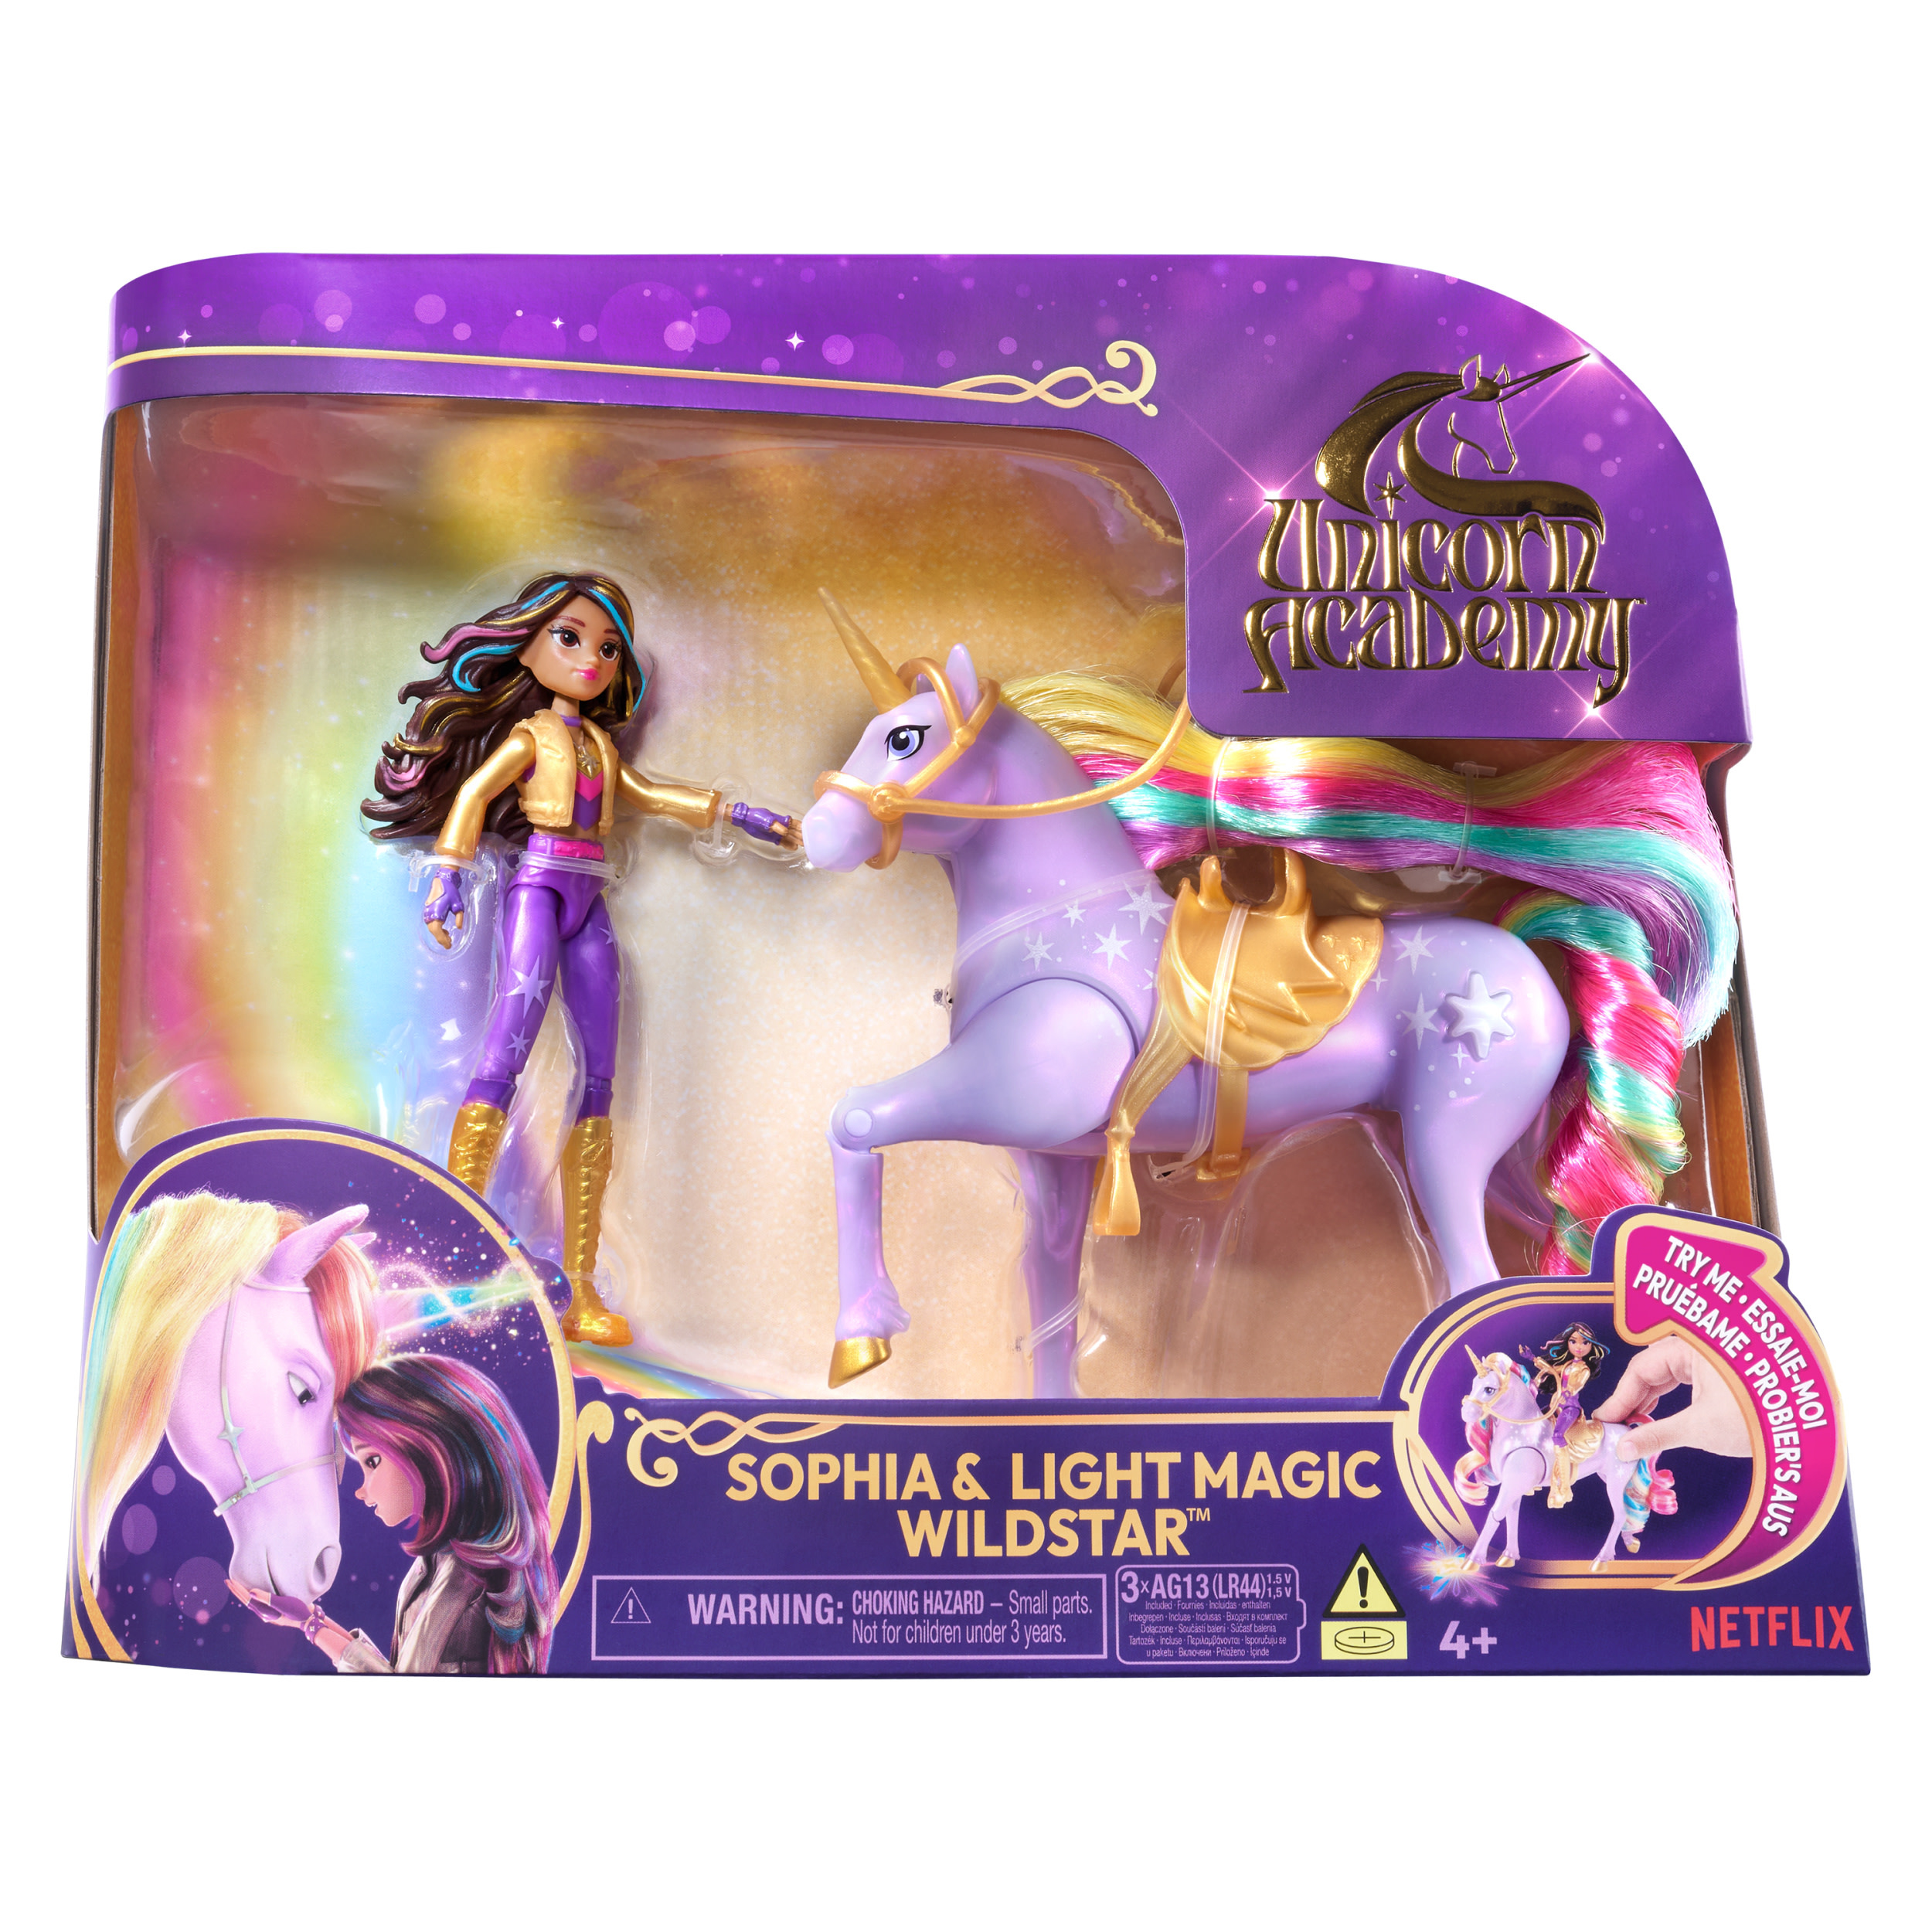 Barbie A Touch of Magic unicorn and mermaid dolls with long hair and  styling accessories 